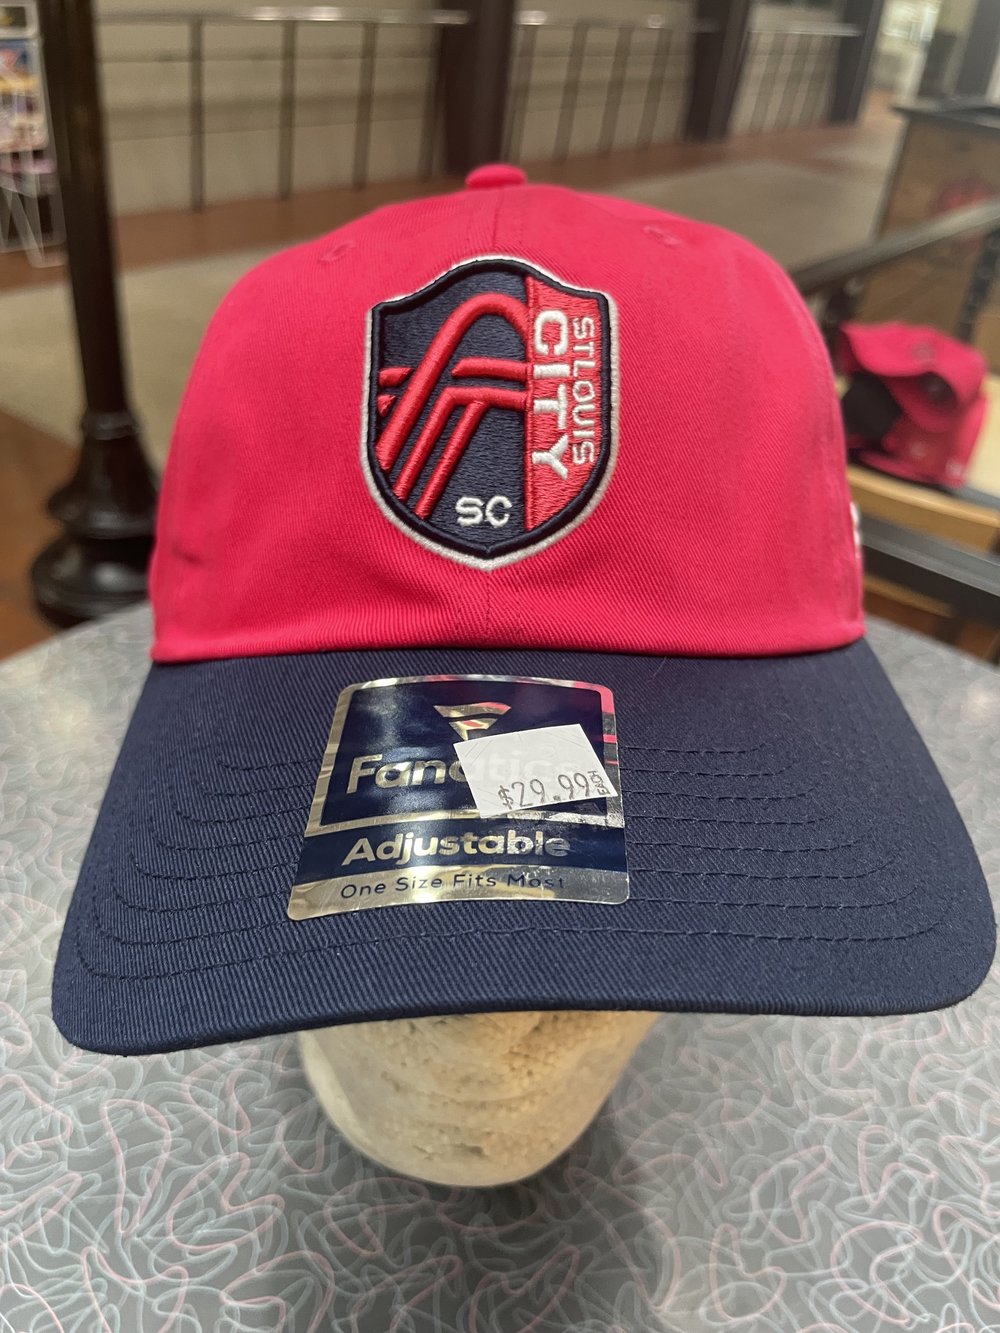 Men's St. Louis City SC New Era Red/Navy Two-Tone 9FIFTY Snapback Hat